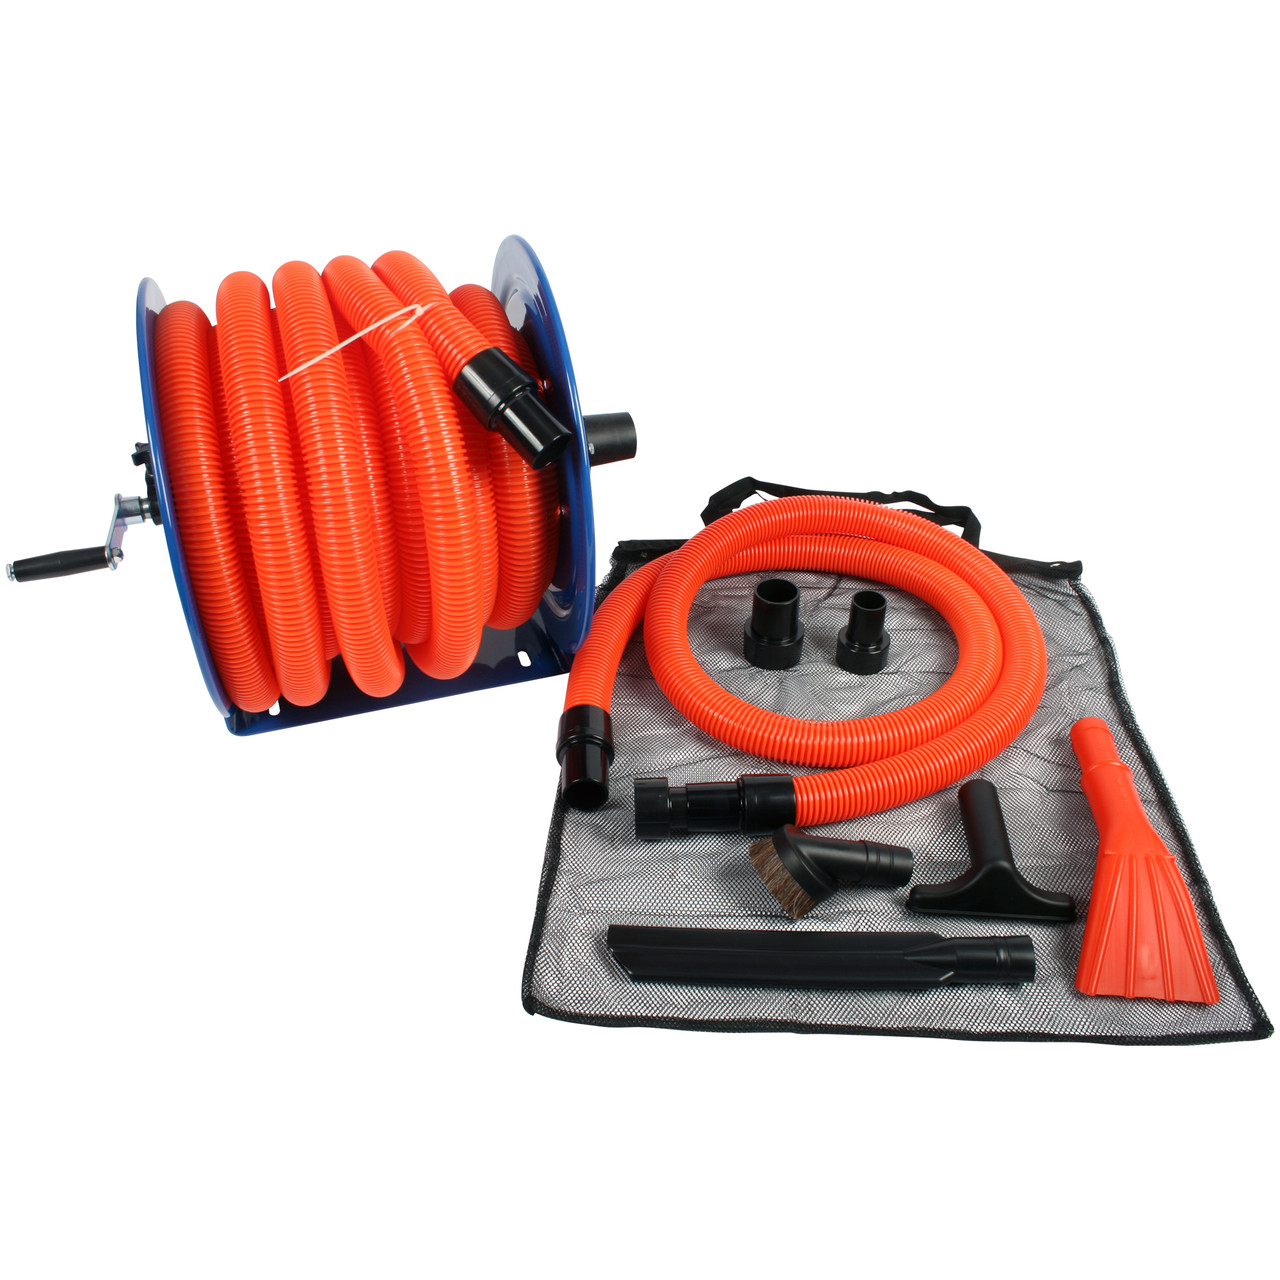 Industrial grade Steel Hose Reel and Wet/Dry Vacuum Attachment Kit